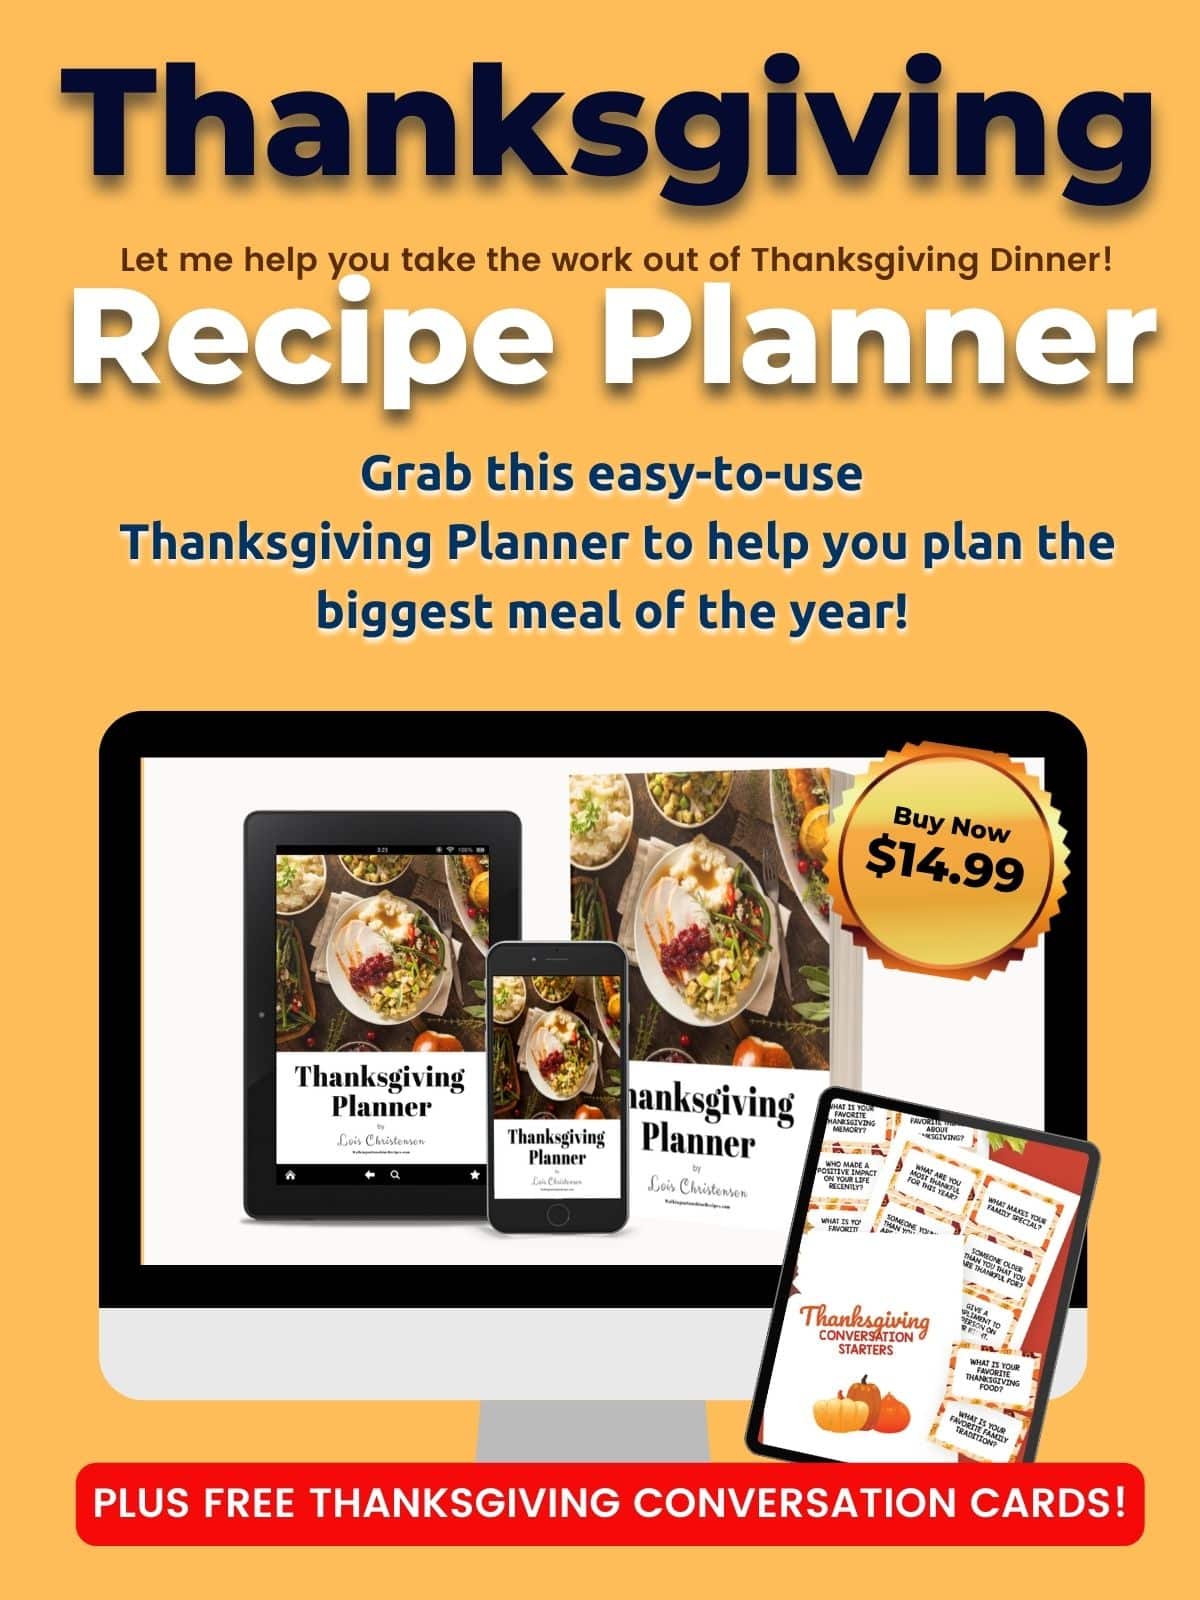 Thanksgiving planner with tips and recipes.